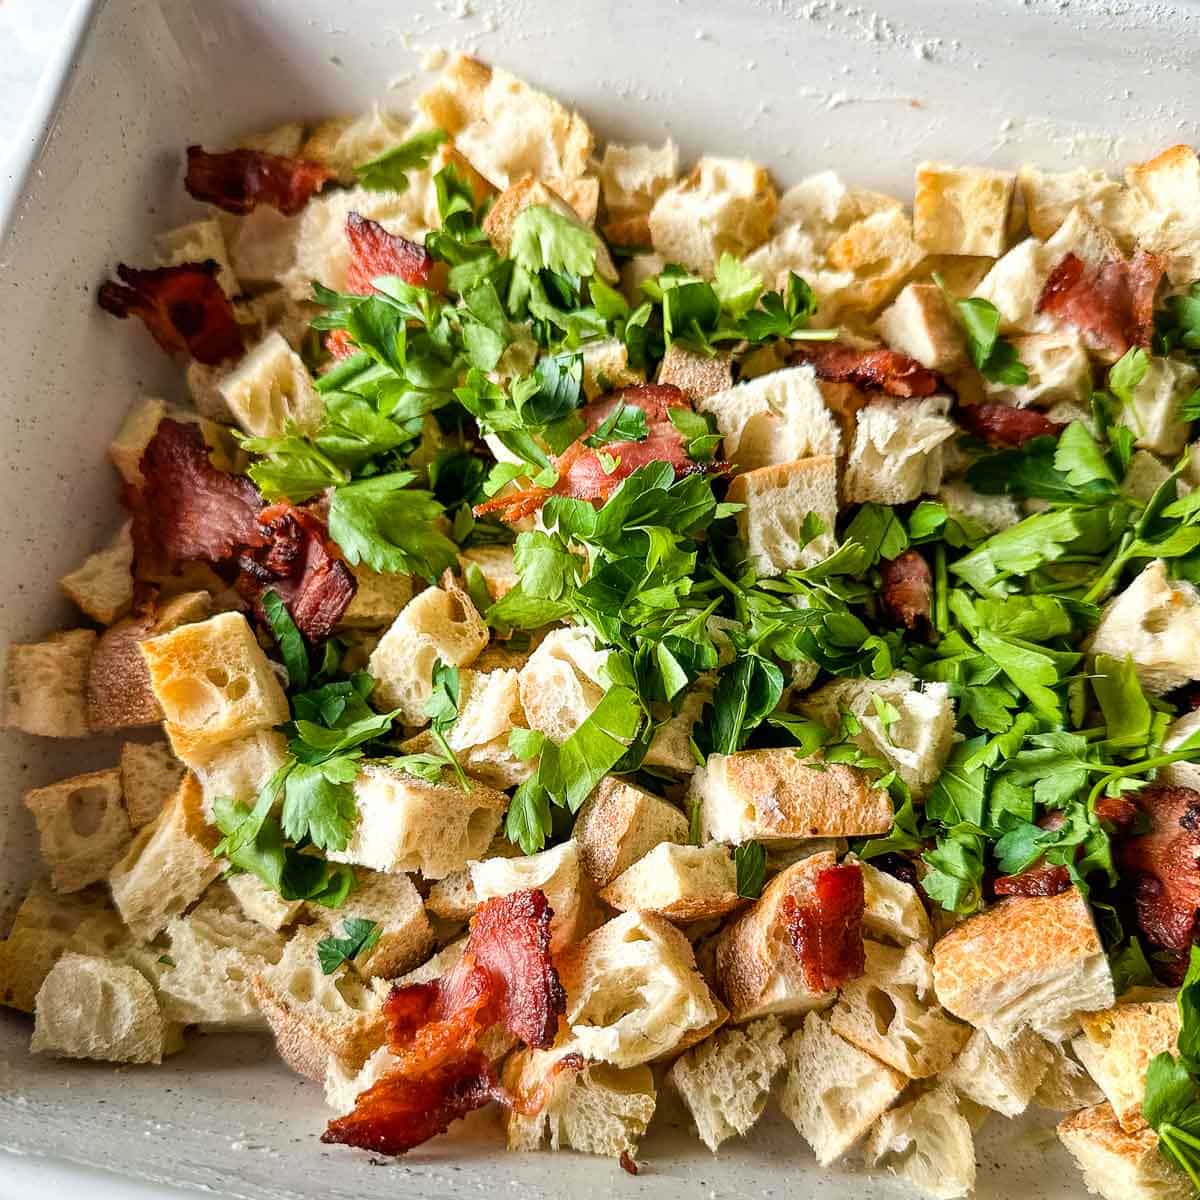 Bread cubes, parsley, and bacon sit in a buttered baking dish.